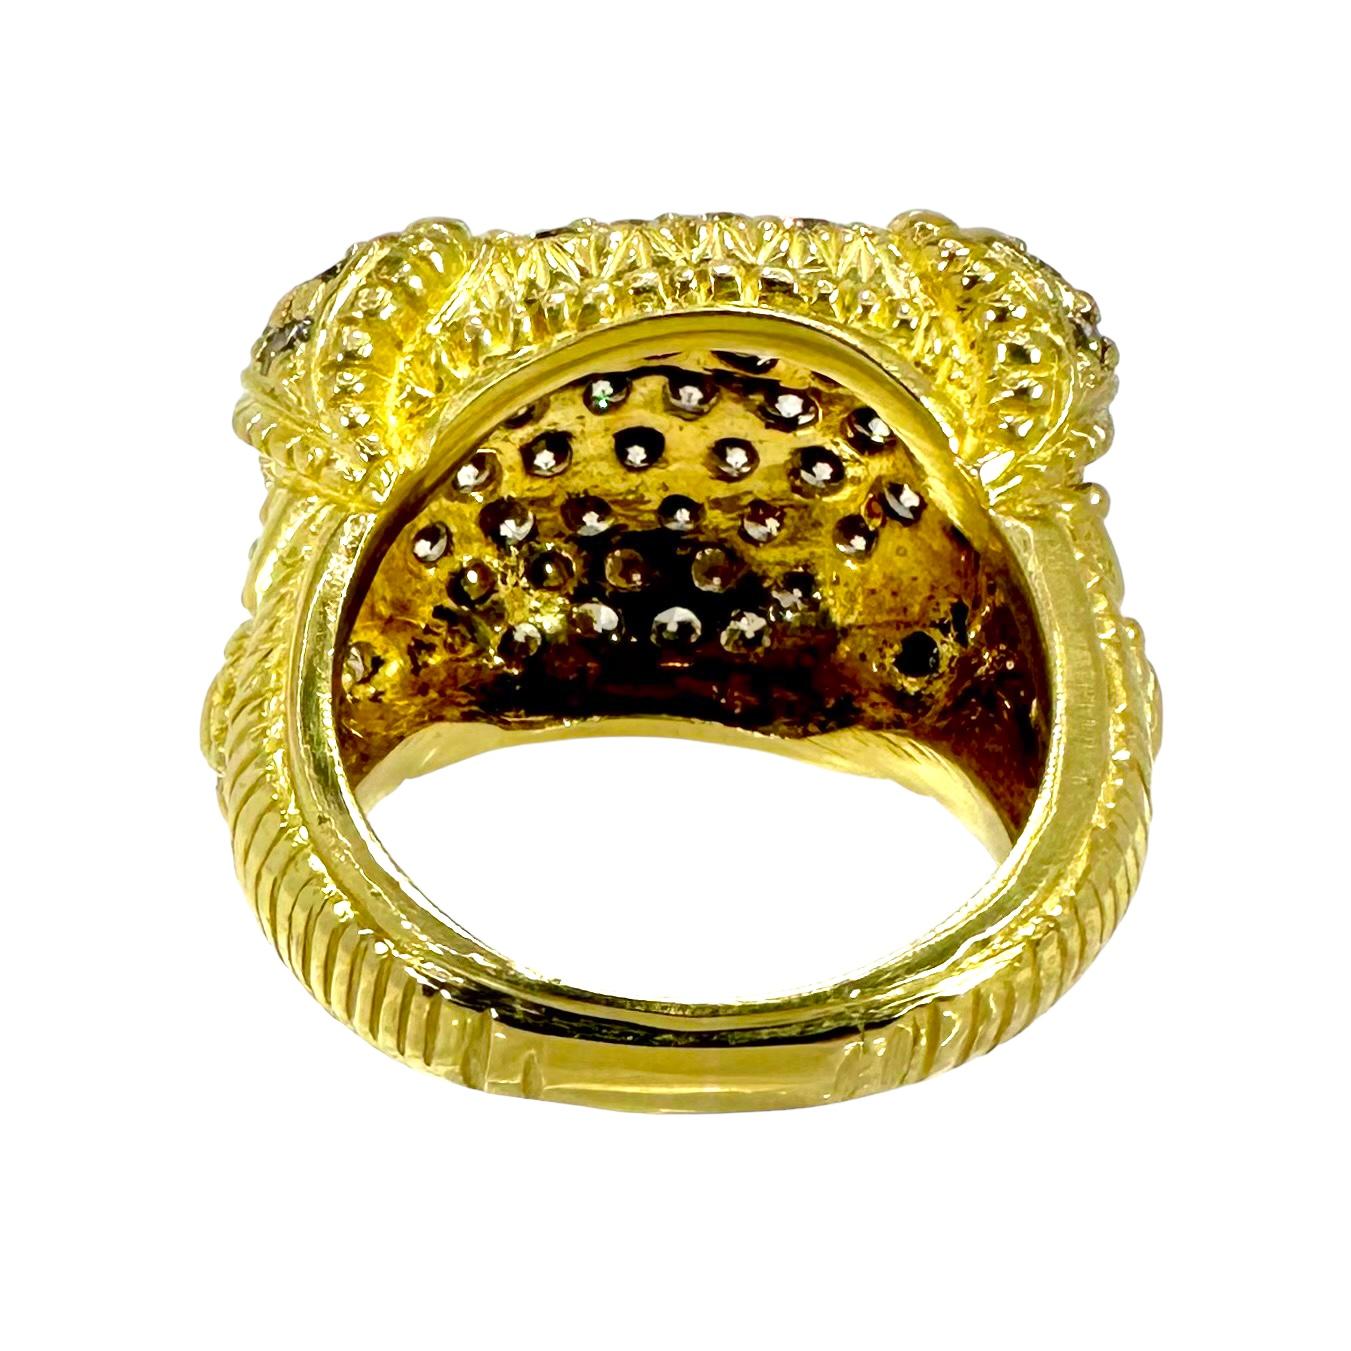 Byzantine Dazzling Judith Ripka 18K Yellow Gold and Pave Set Diamond Cocktail Ring For Sale